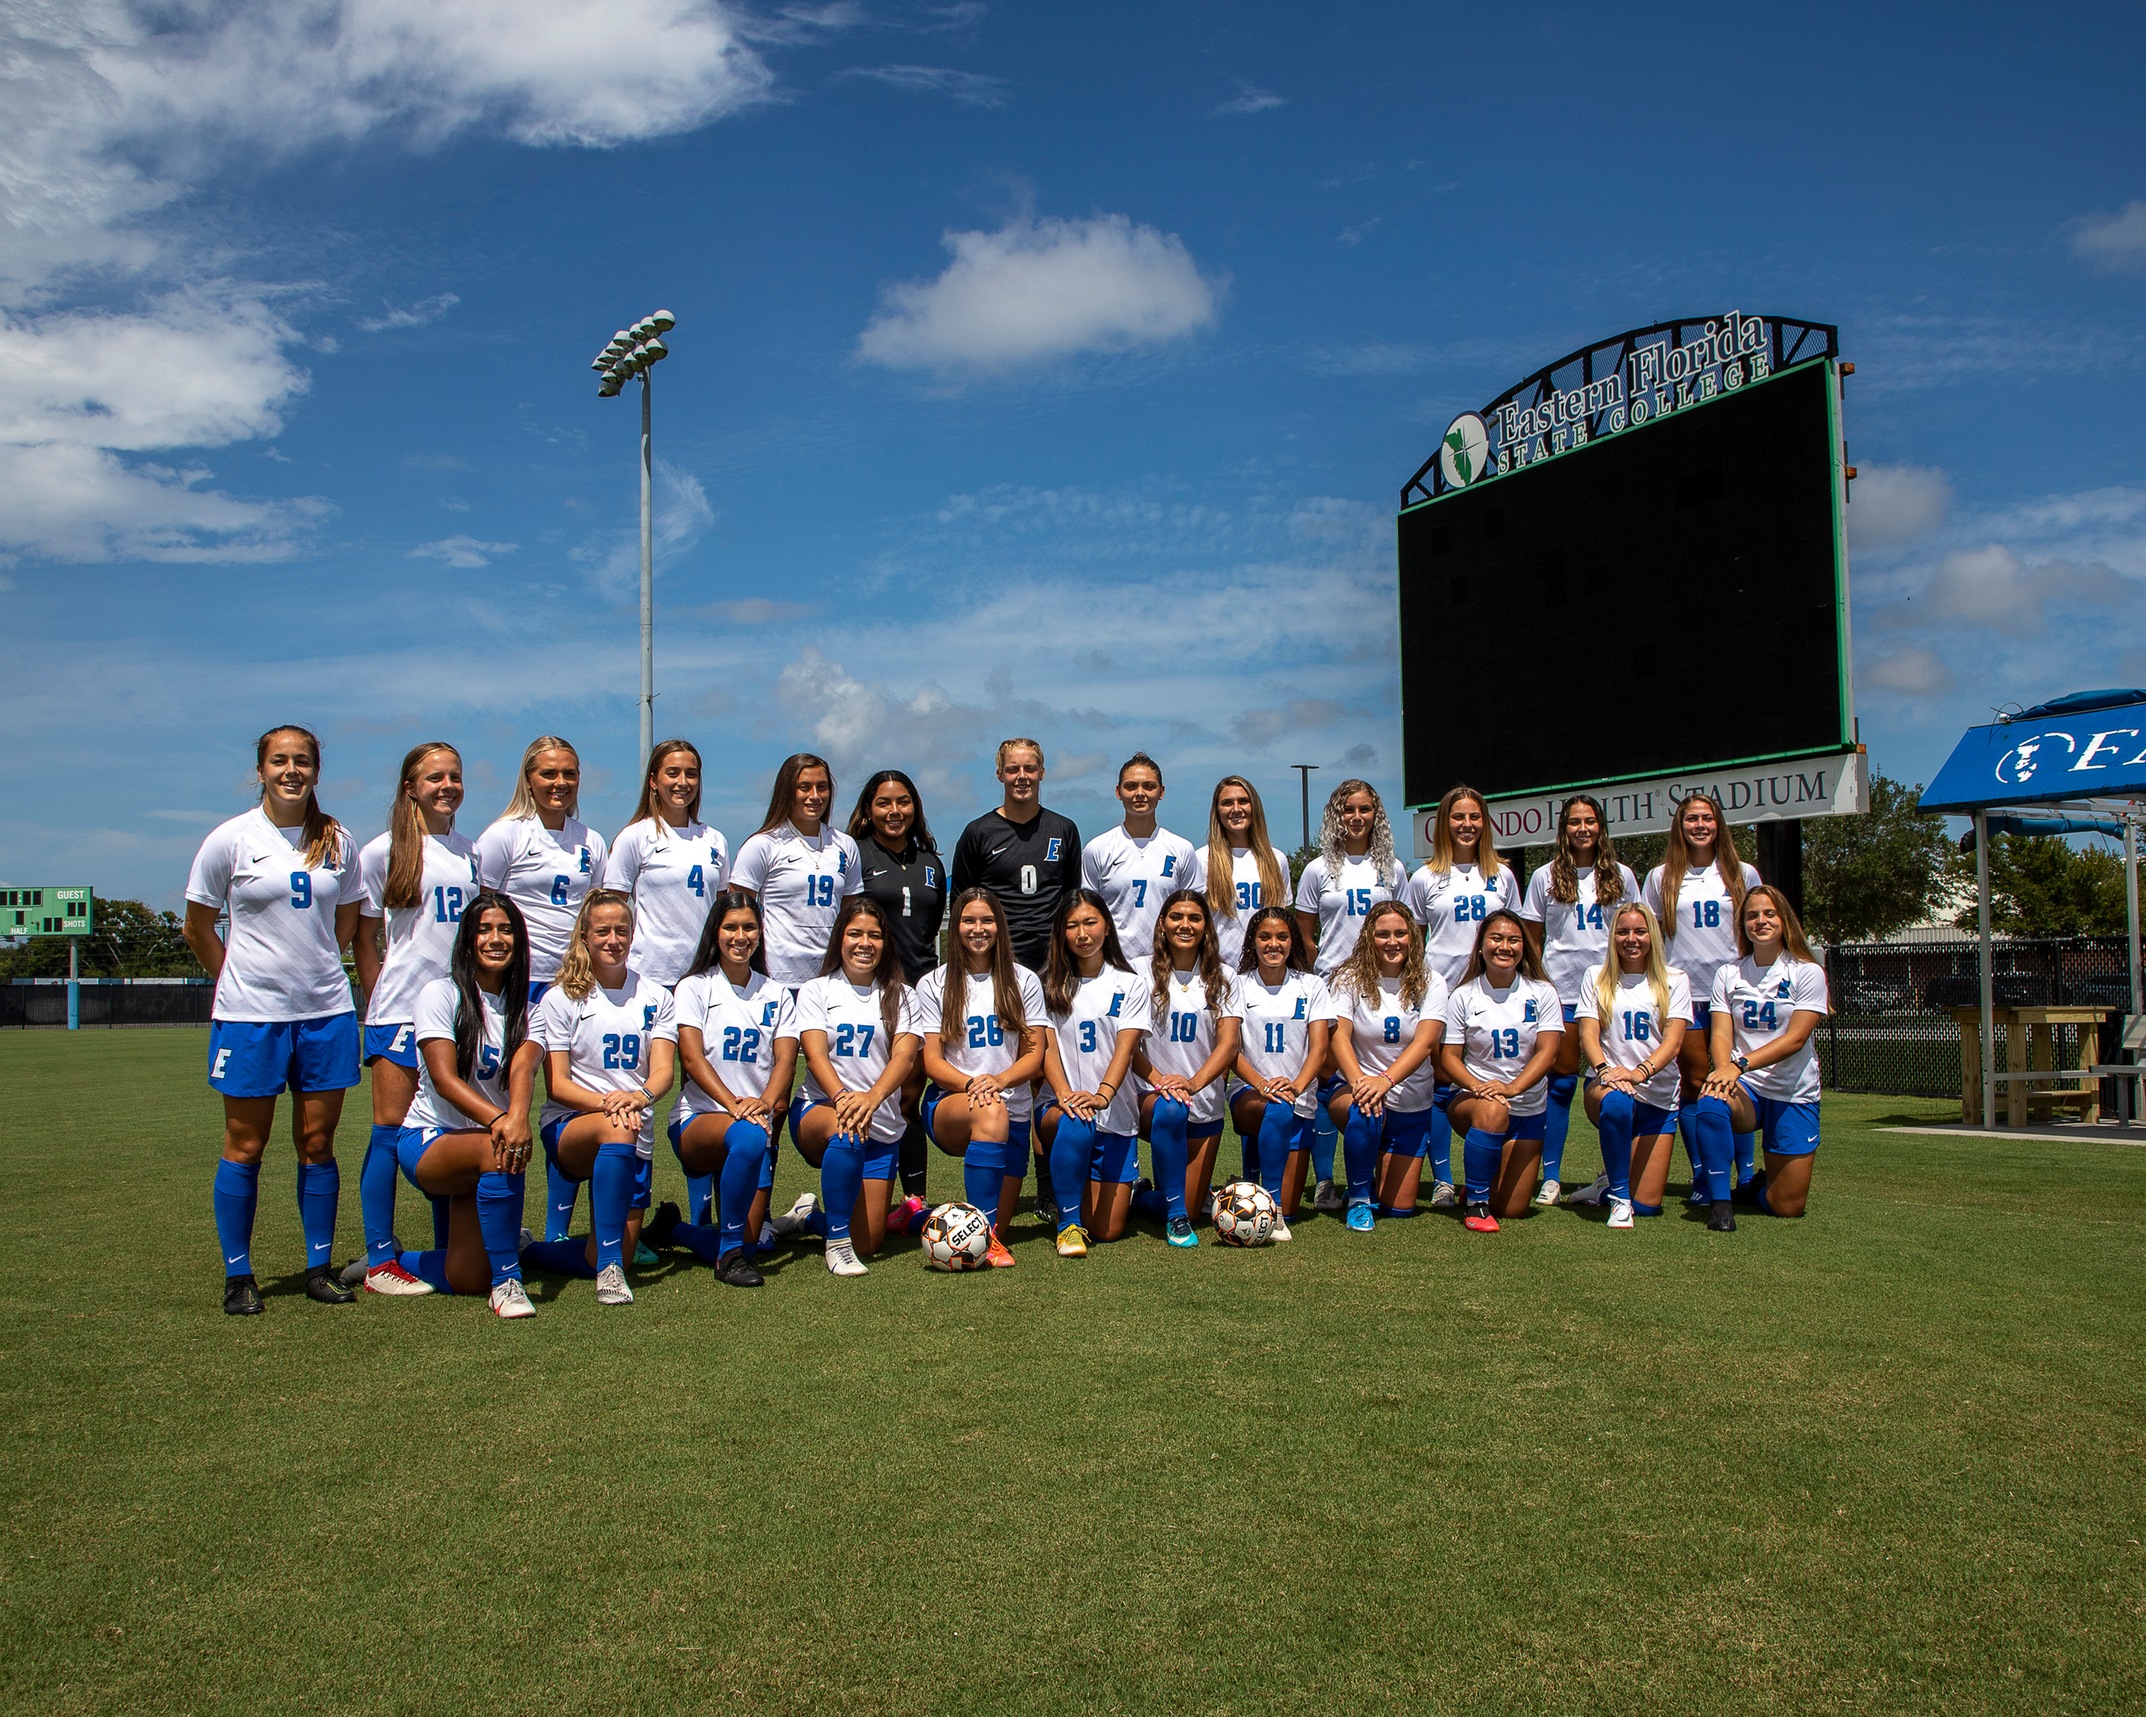 Women's soccer team plays in national tournament Monday afternoon